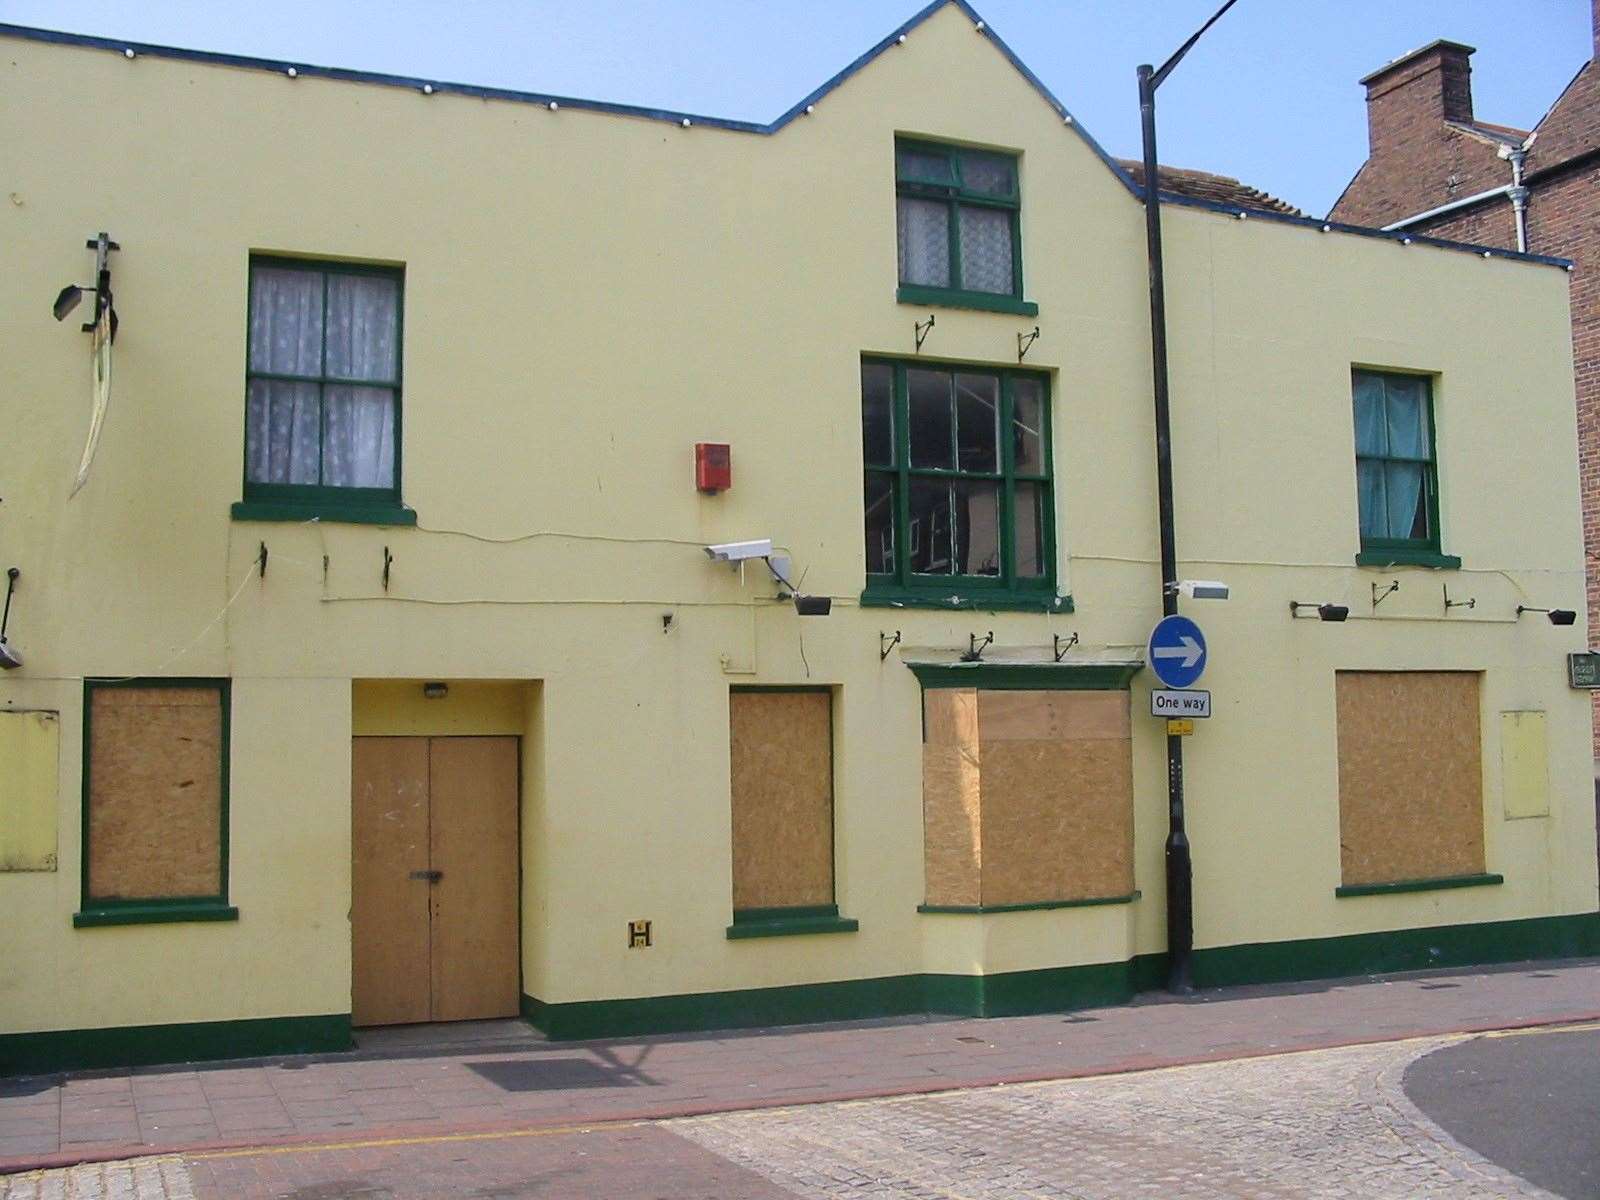 Scruffy Ducks in William Street, Herne Bay, sat empty for four years after it closed for good